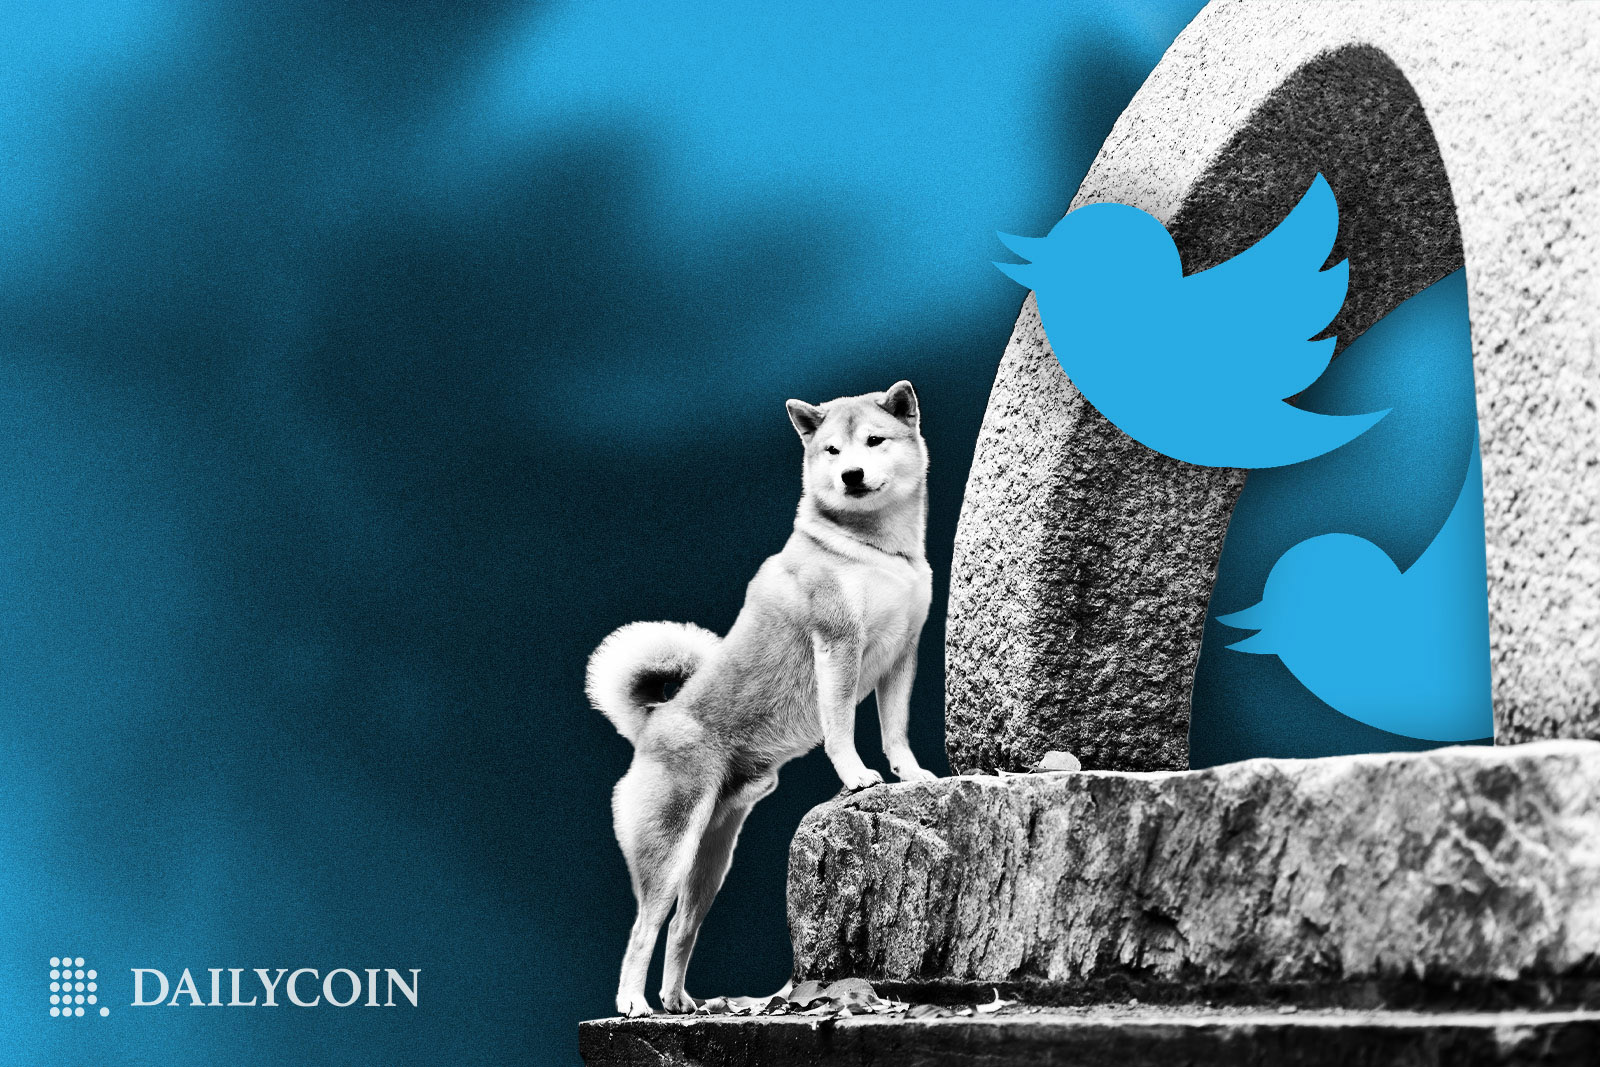 White Shiba Inu standing on a stone sculpture next to flying blue Twitter logo birds